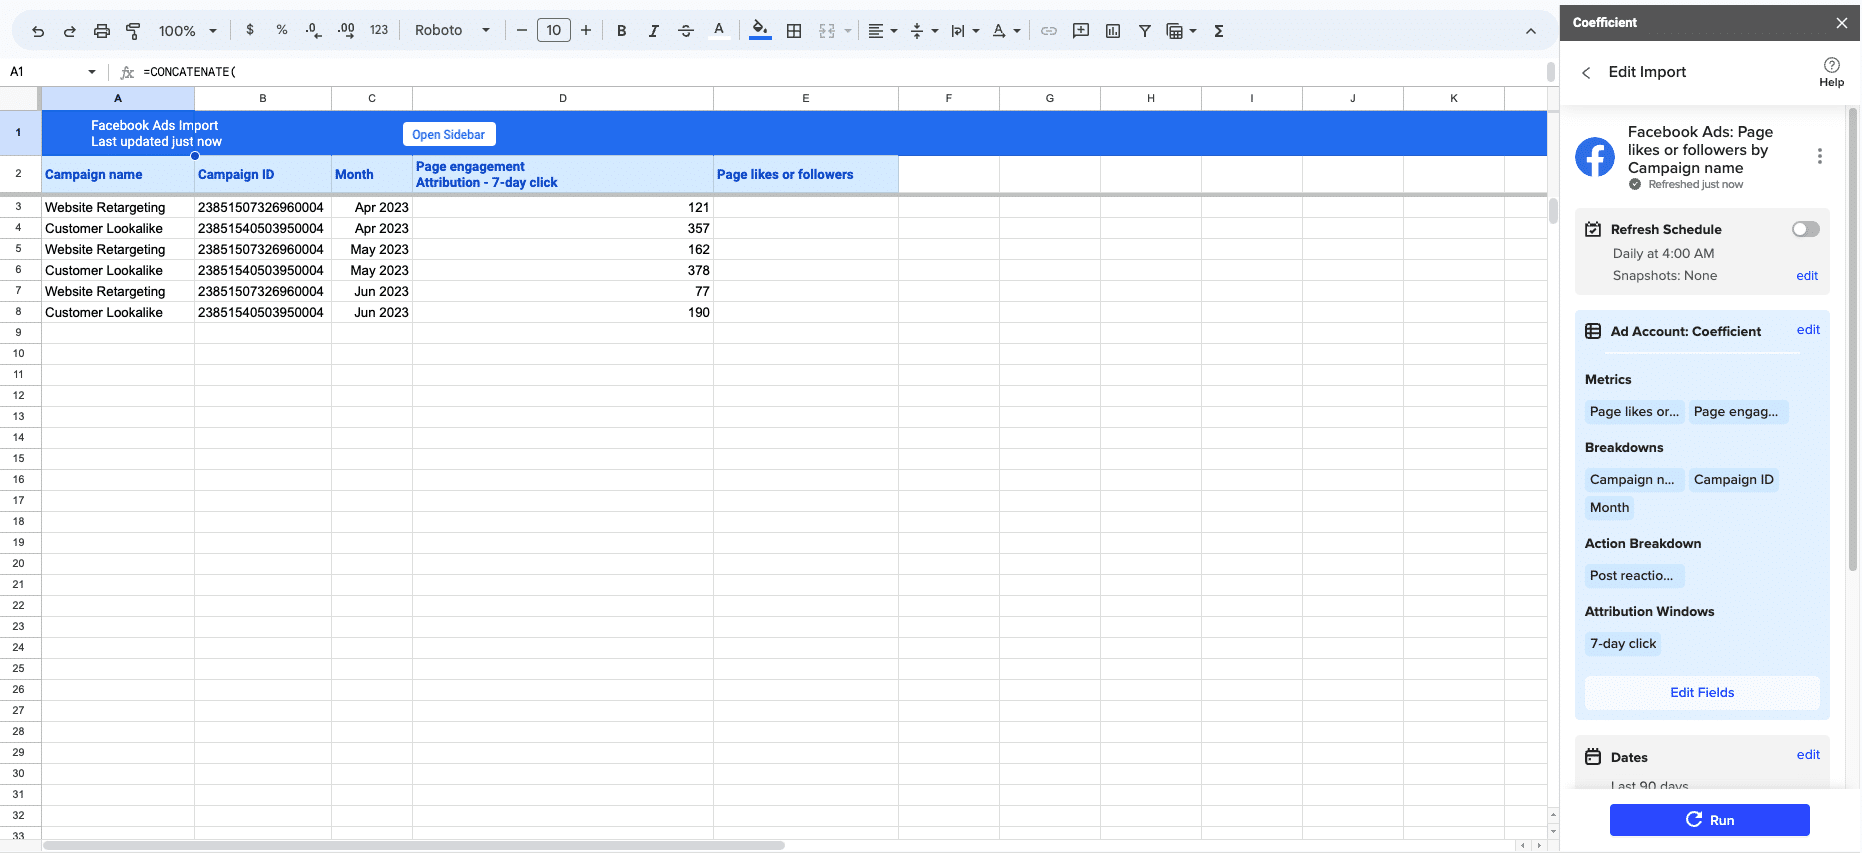 Your data will automatically populate your spreadsheet